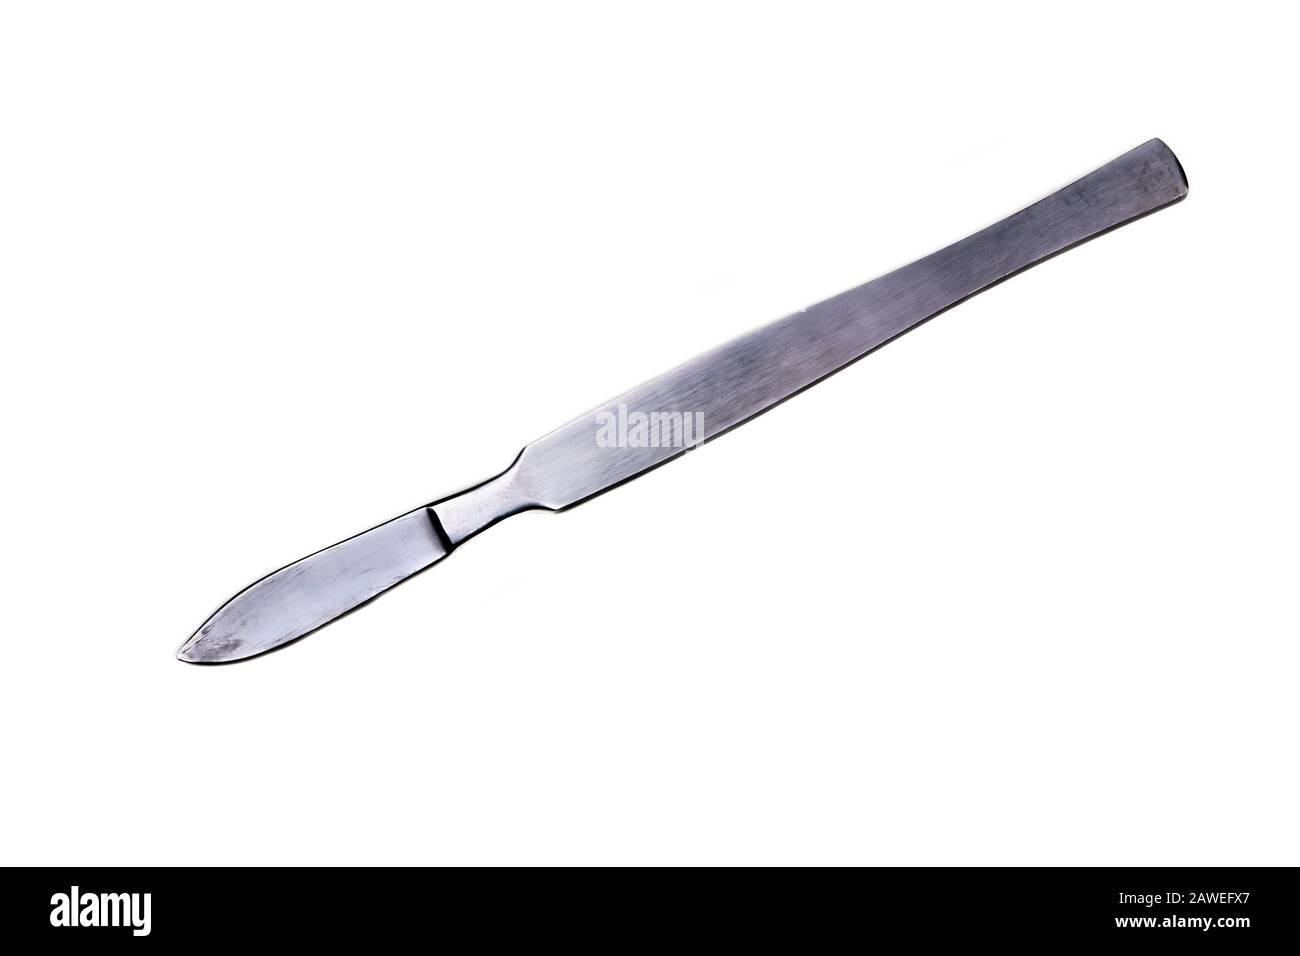 Surgical metal scalpel isolated on white background Stock Photo